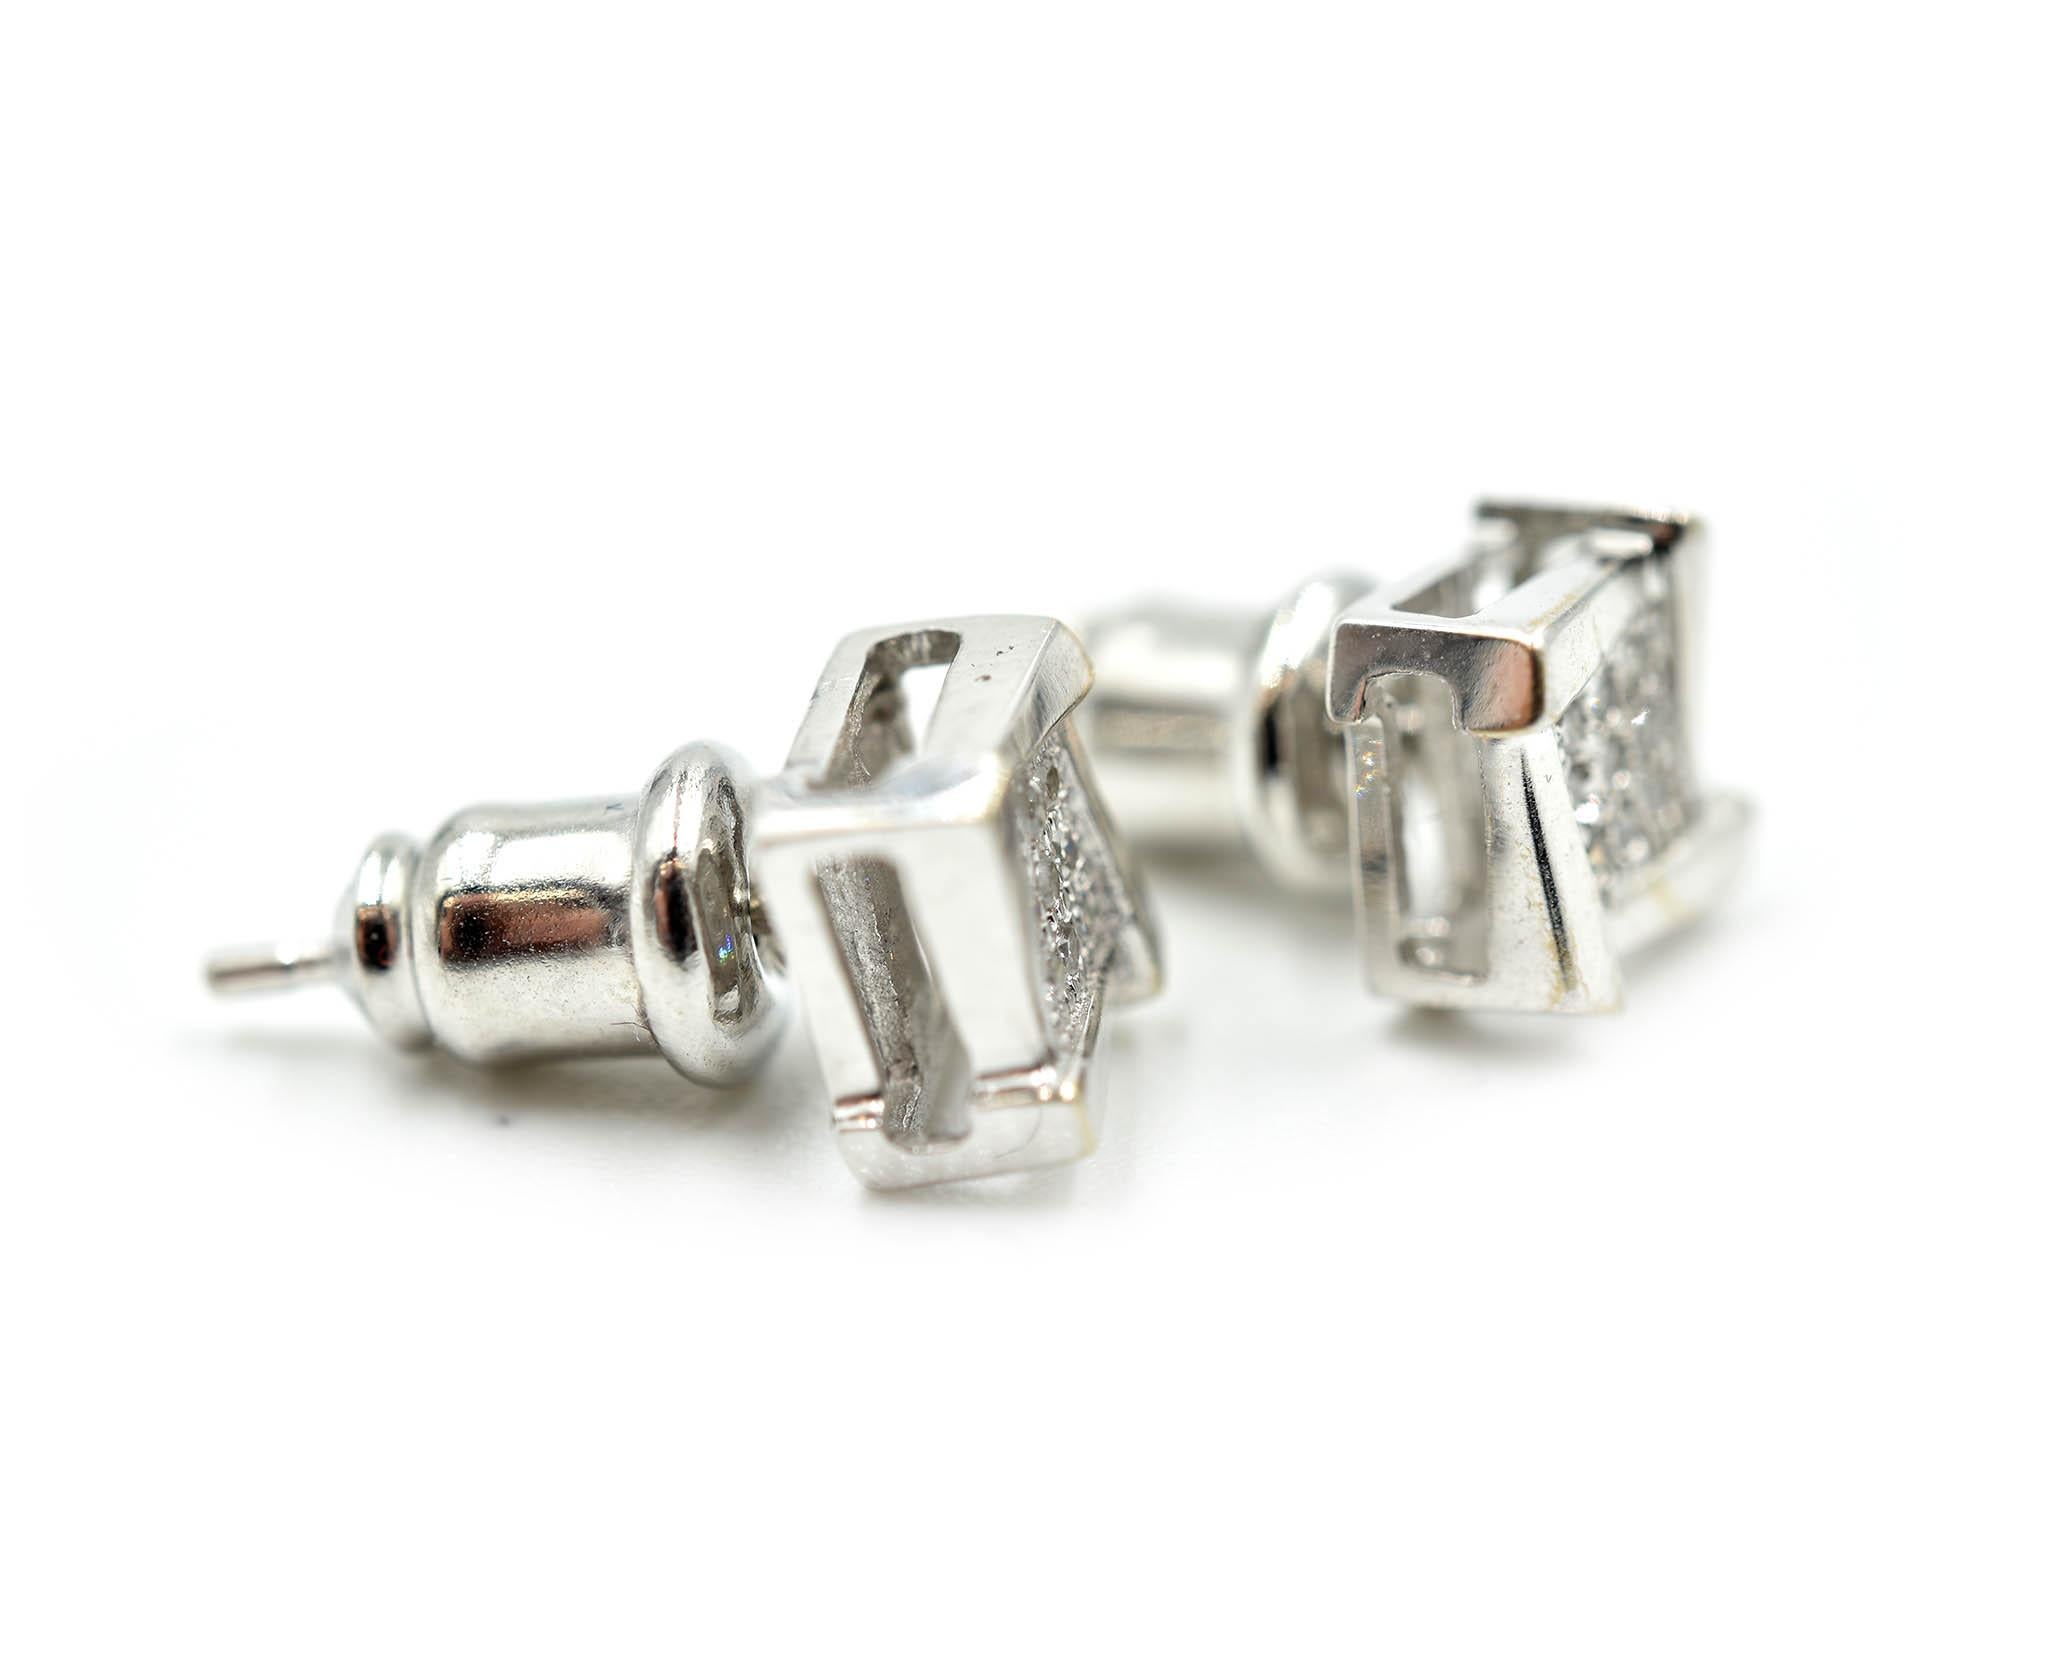 This pair of studs features round diamonds set in a high polished 10k white gold setting. The diamonds weigh 0.09 carats. Each stud measures 6.17mm in diameter. The pair of earrings is secured with friction back fastenings. The weight of the studs